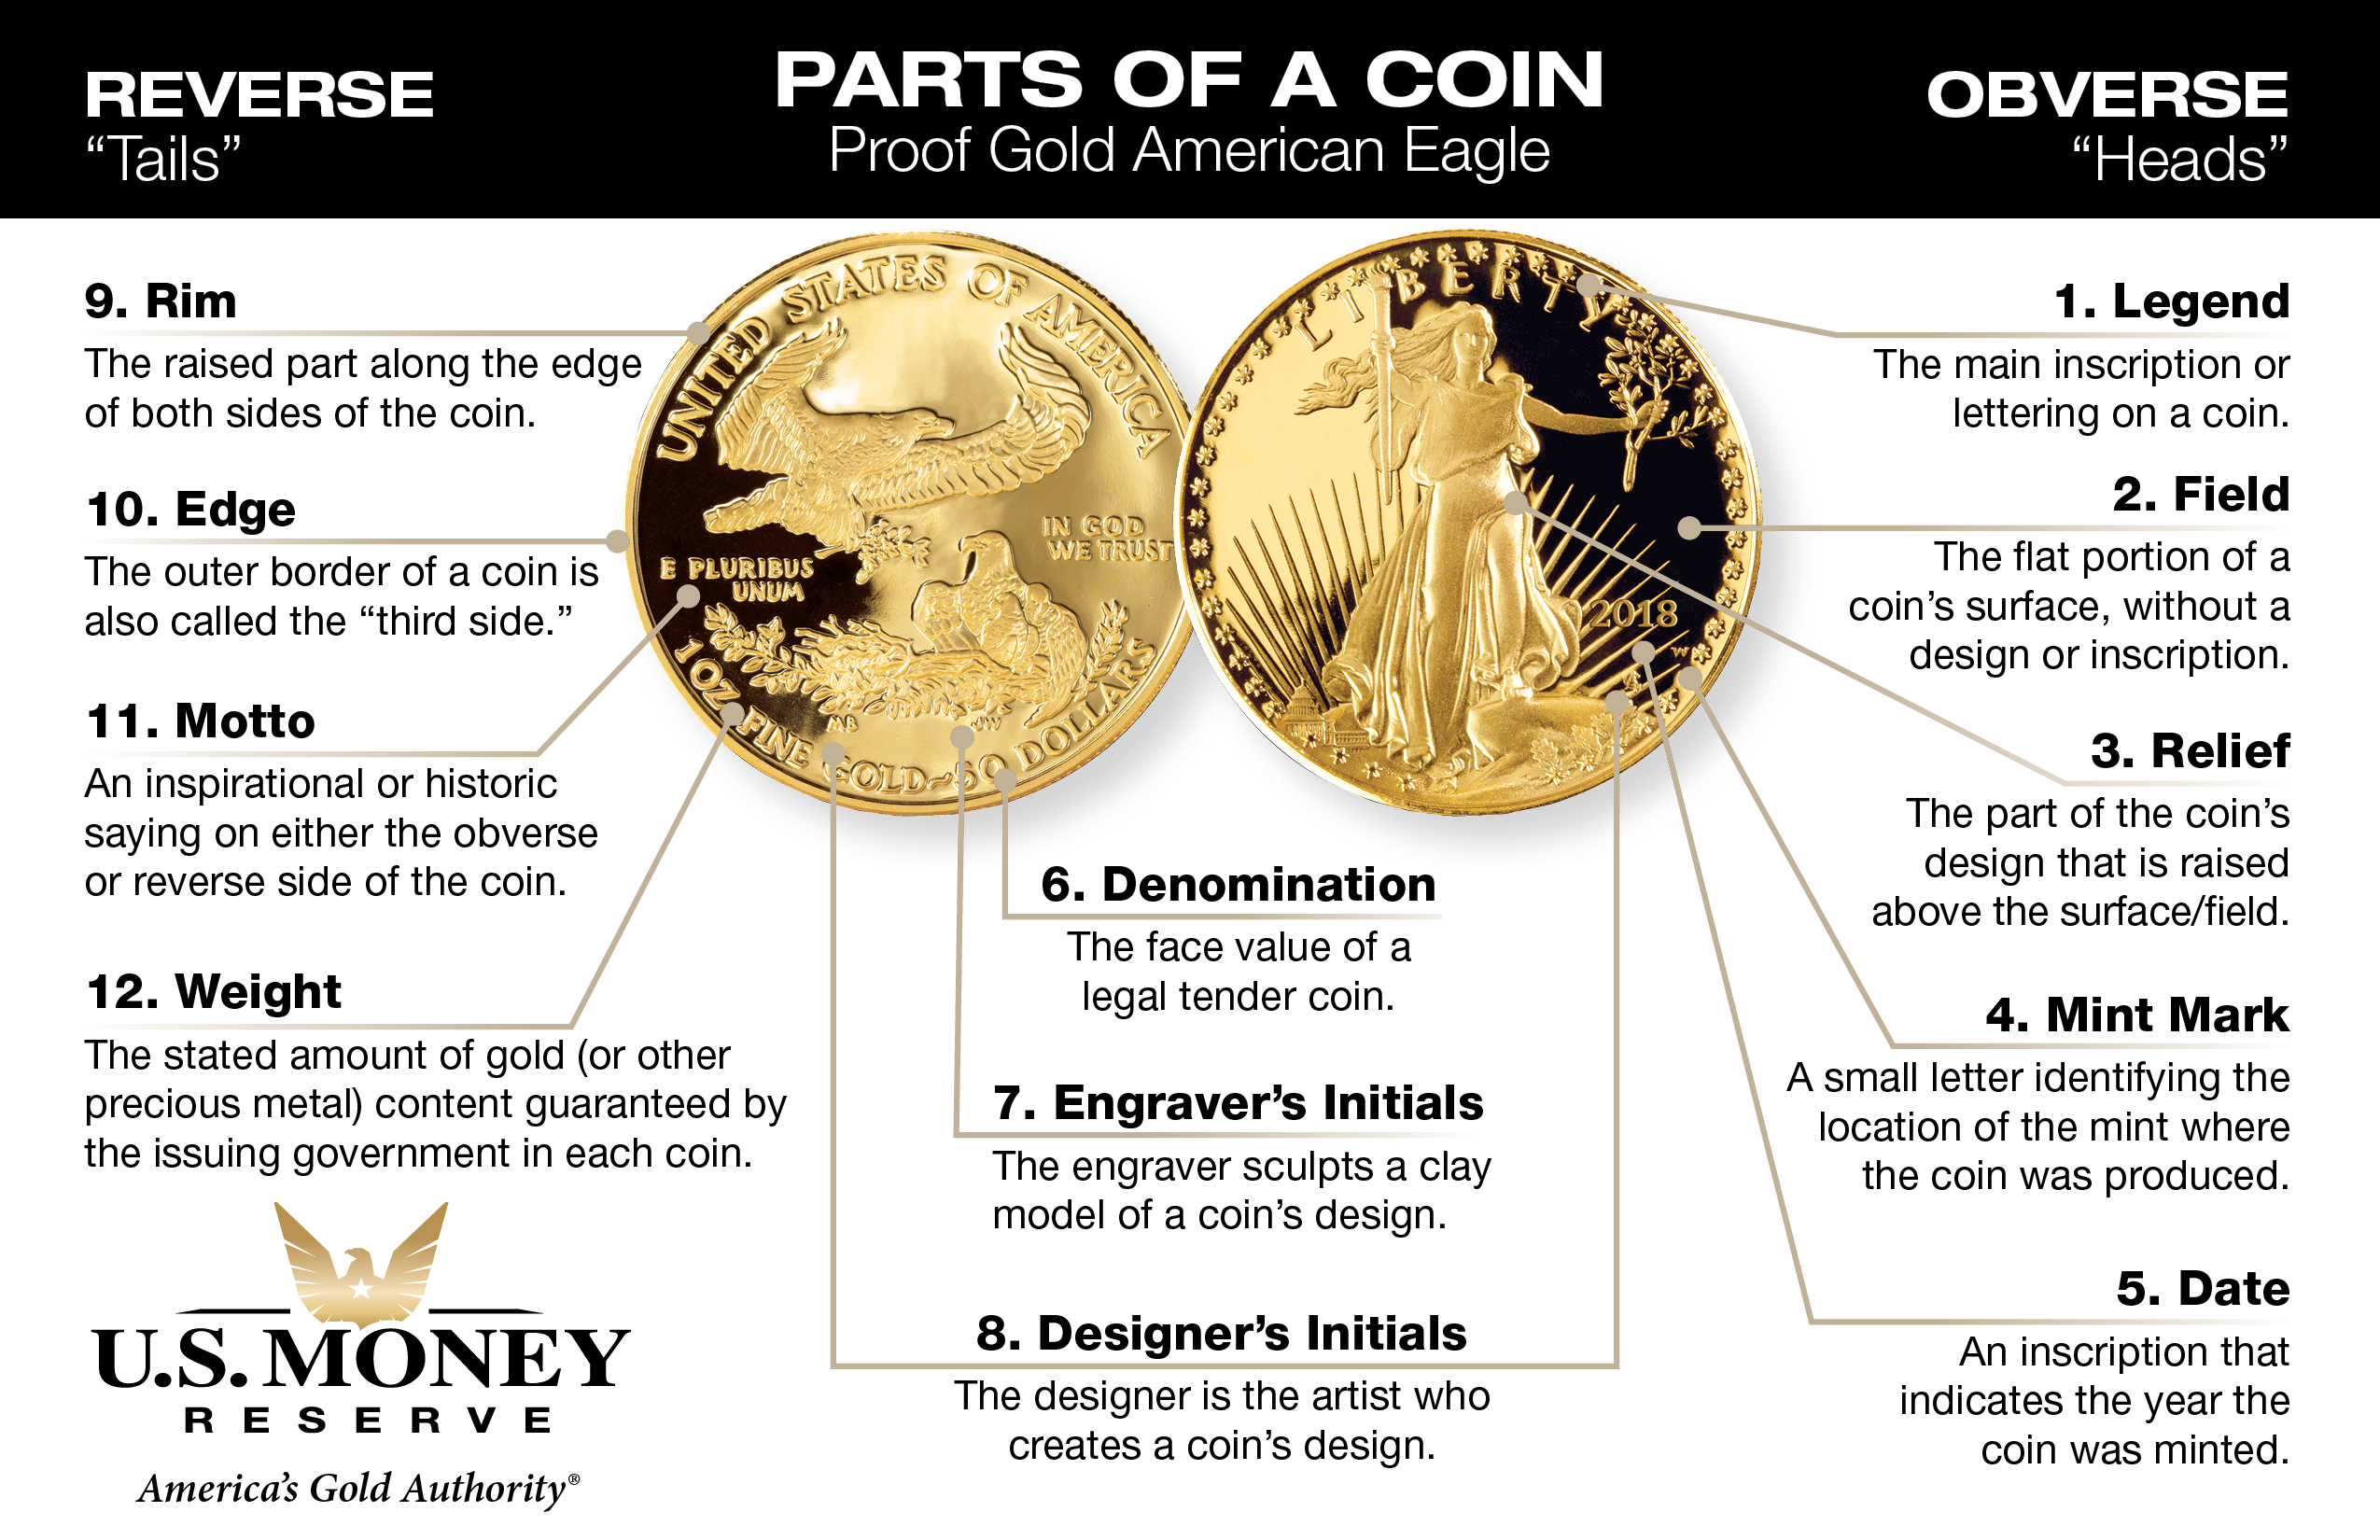 parts-of-a-coin-gold-american-eagle-anatomy-u-s-money-reserve